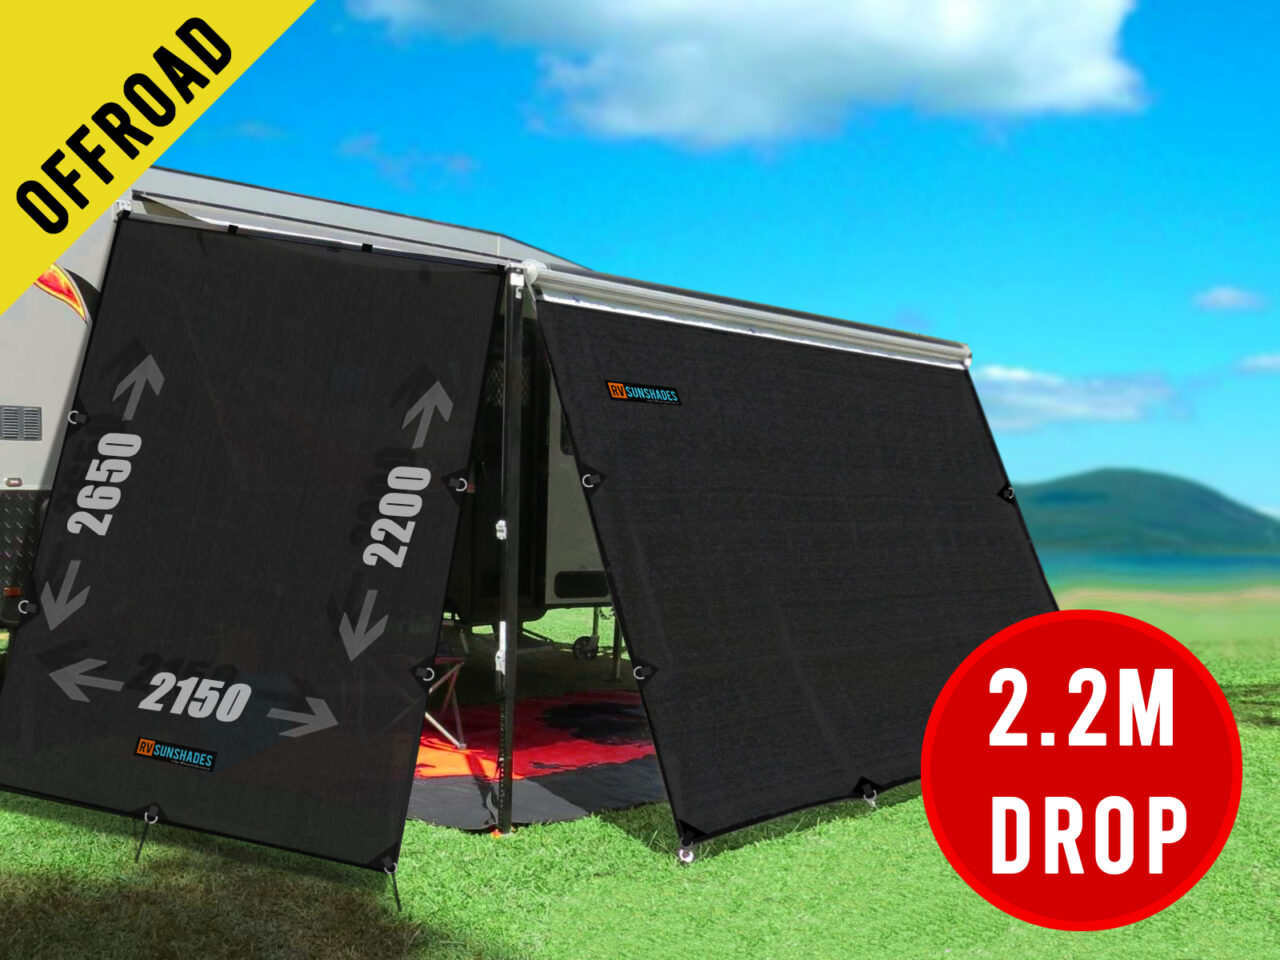 Offroad Caravan Privacy Screen 5.2x2.2m suit 18Ft Awning (2.2m Drop) iNSANE.SALE